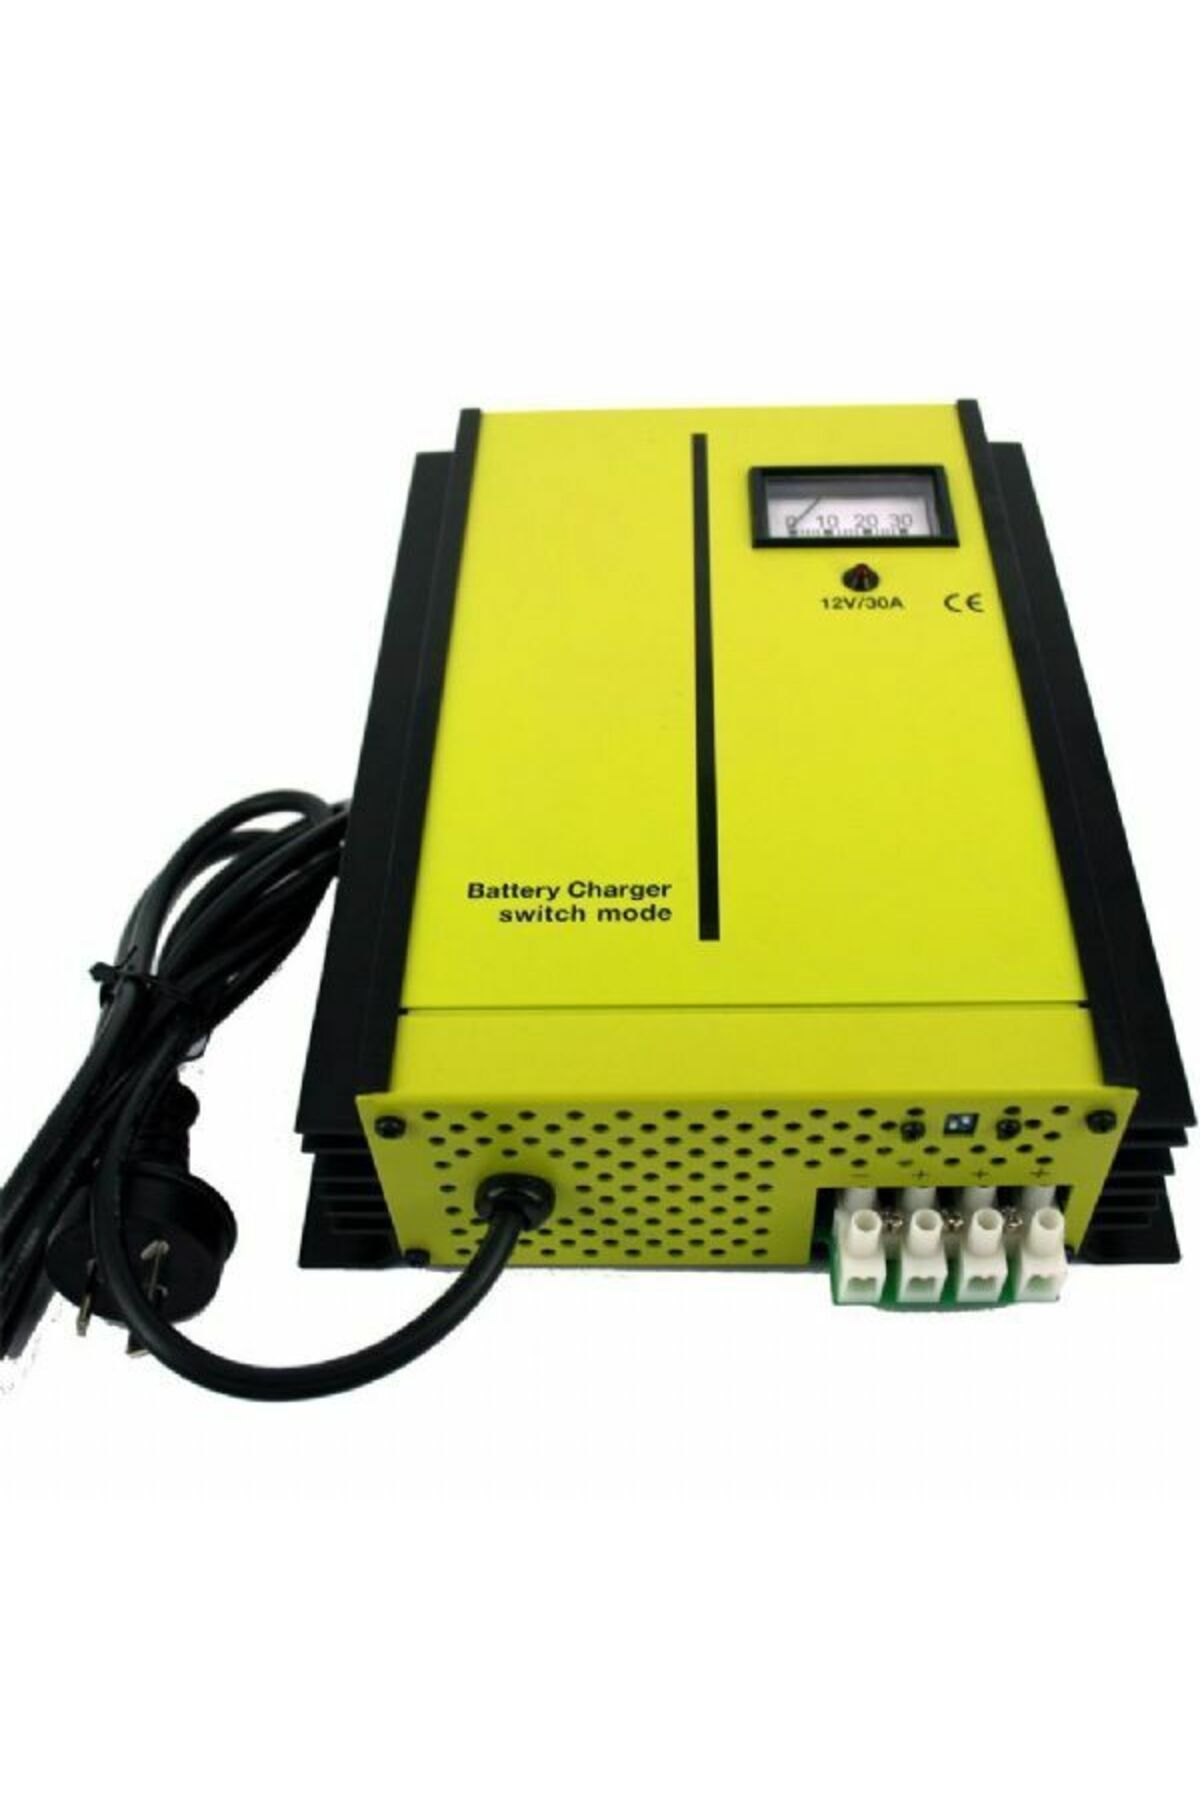 Linetech 12V 30A Battery Charger